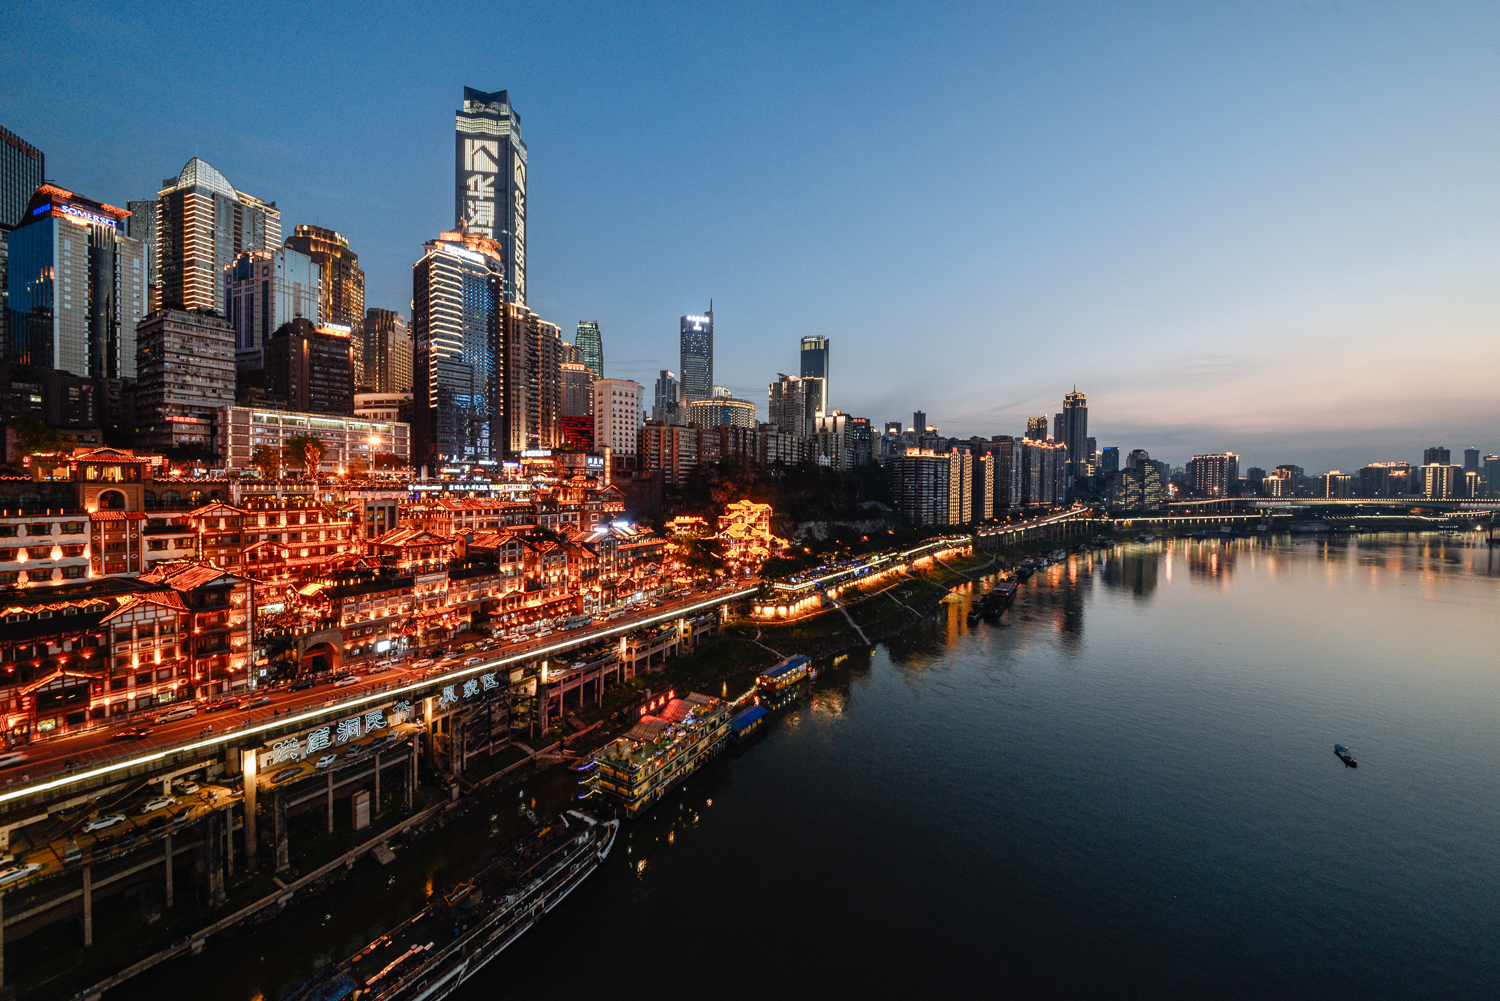 A_Sunset_View_of_Chongqing_Central_Business_District.jpg